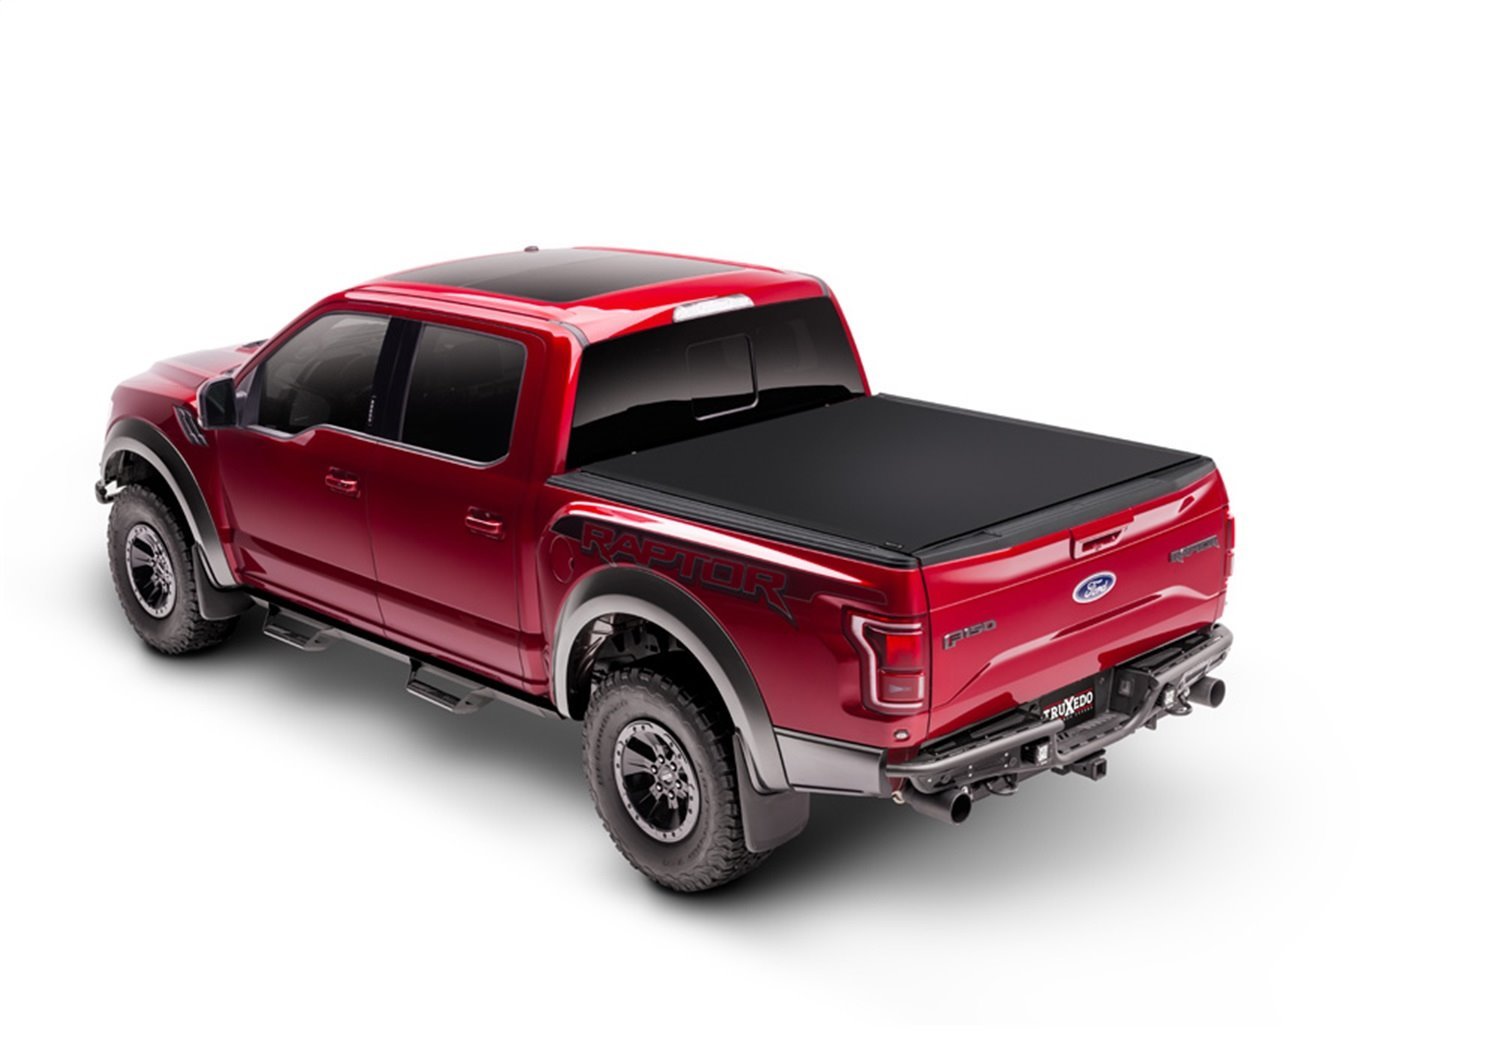 1592516 Sentry CT Hard Roll-Up Tonneau Cover Fits Select Nissan Frontier Pickups w/5 ft. Bed [Matte Black]